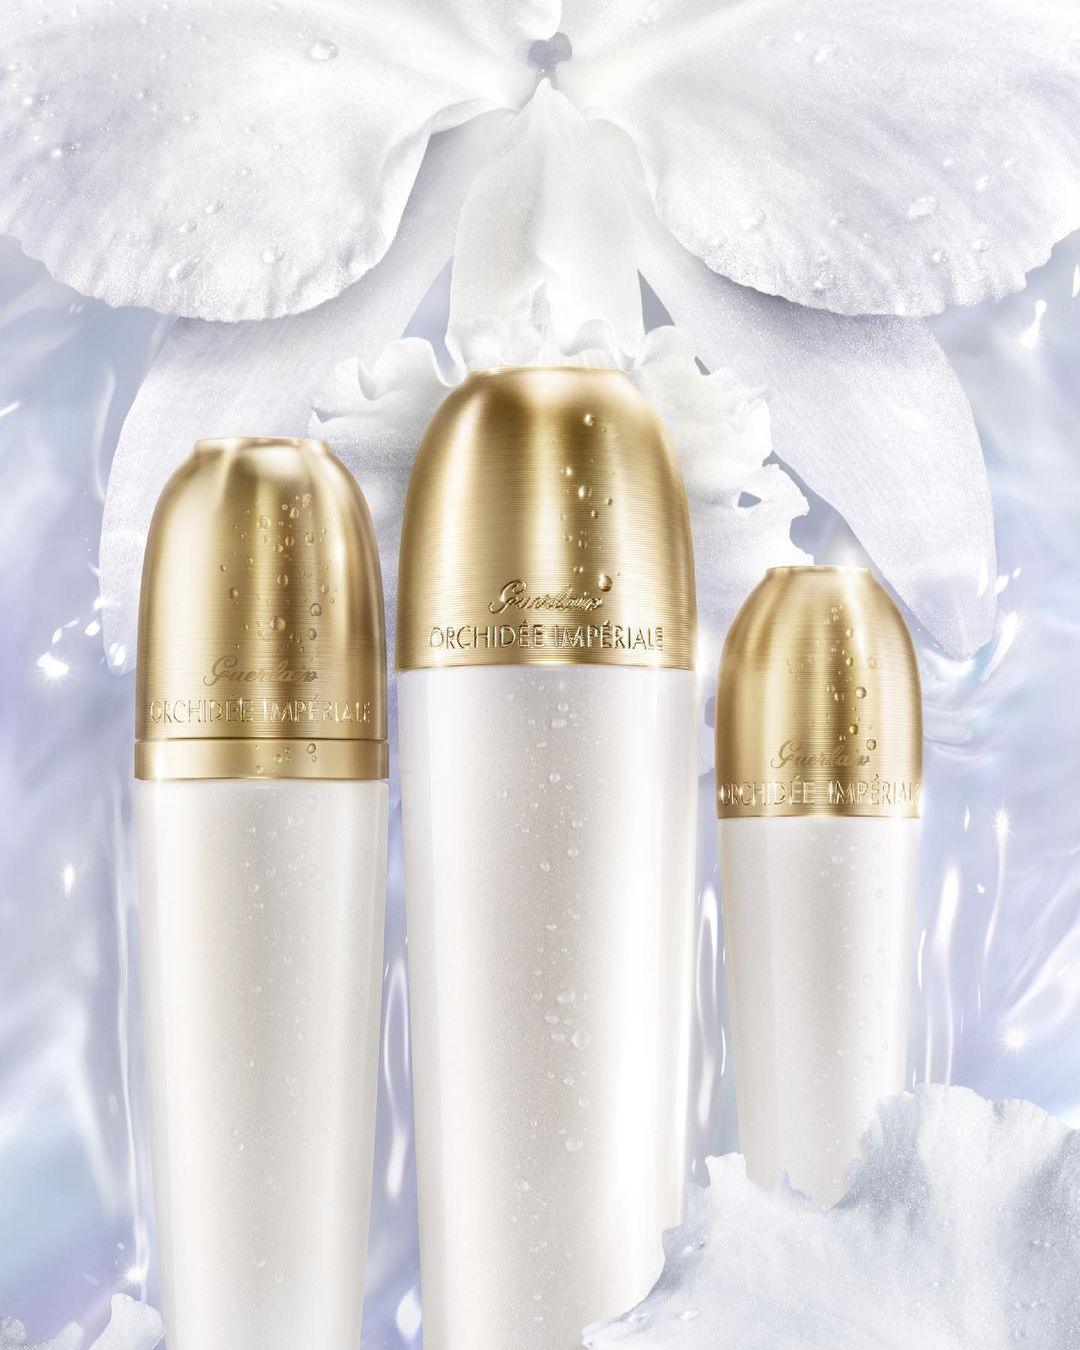 Orchidee Imperiale Brightening - Ascent Luxury Cosmetics